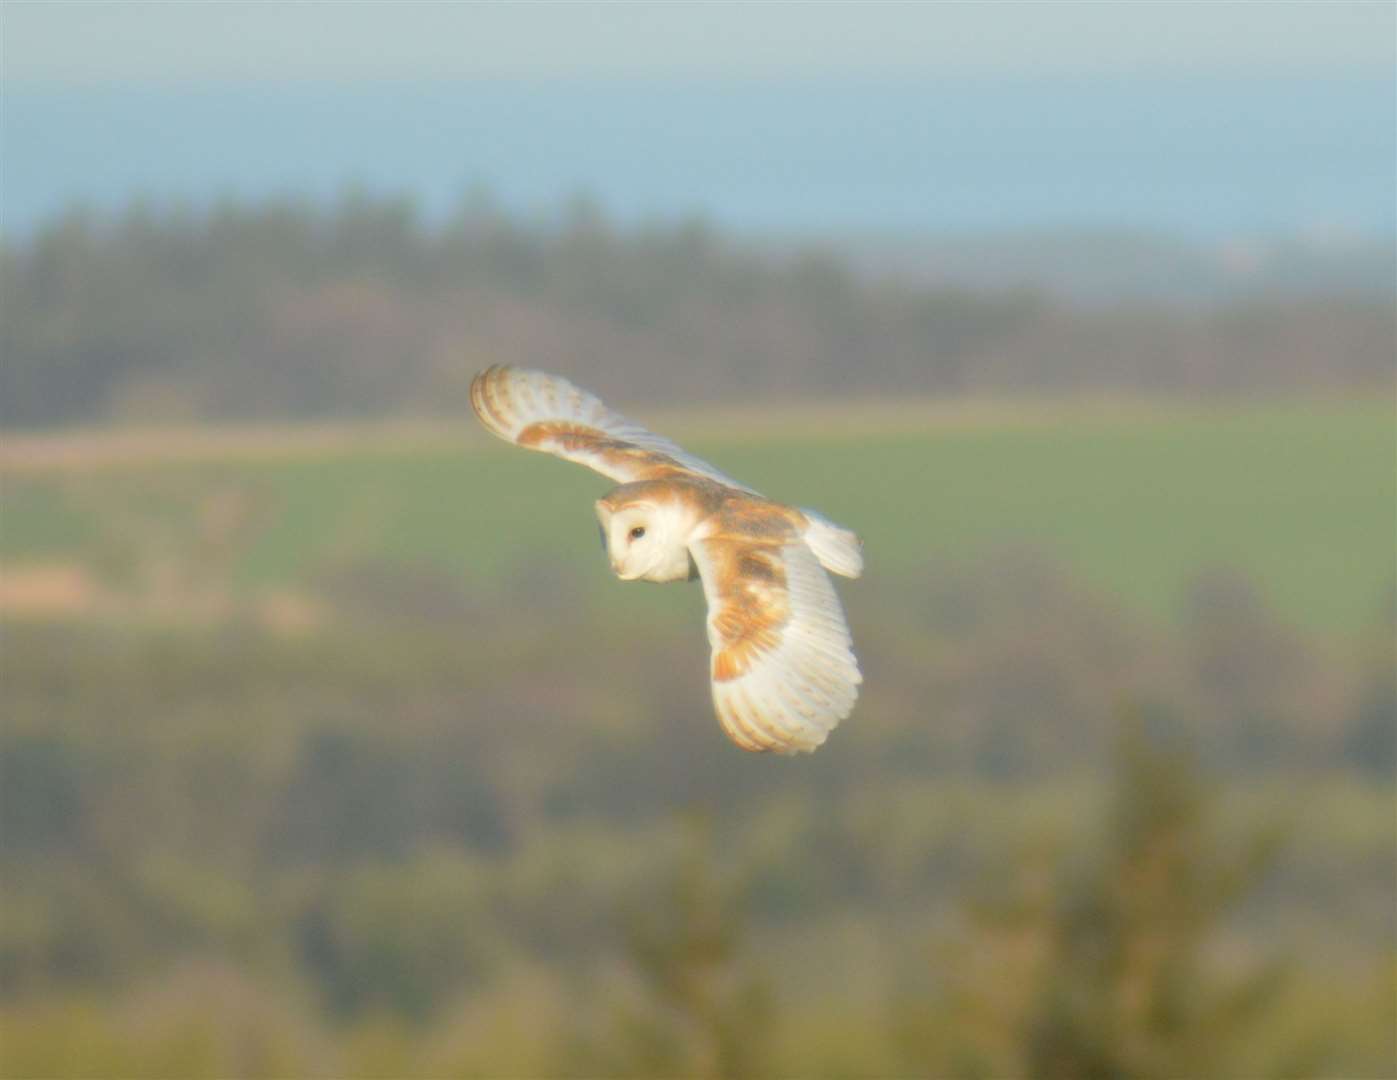 Adult barn owls don't tend to rescue their young if they've come out the nest prematurely. Image: Stock image.